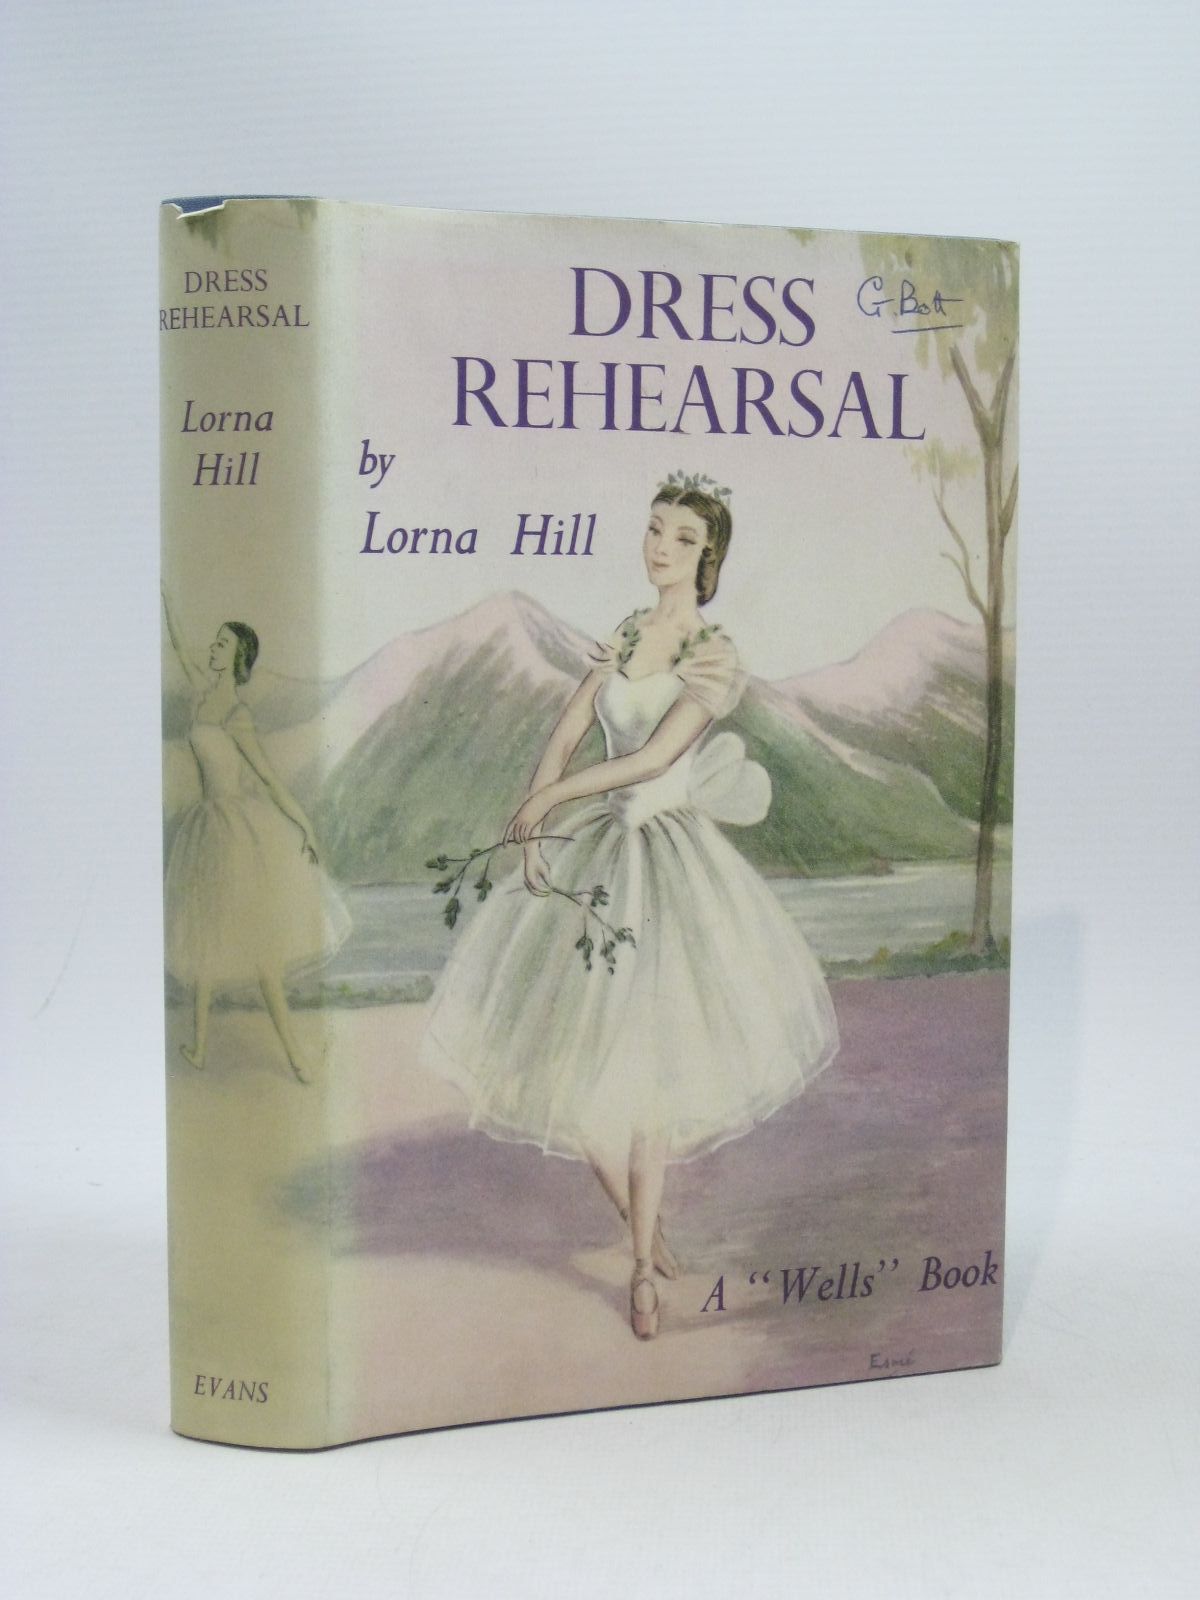 Cover of DRESS REHEARSAL by Lorna Hill